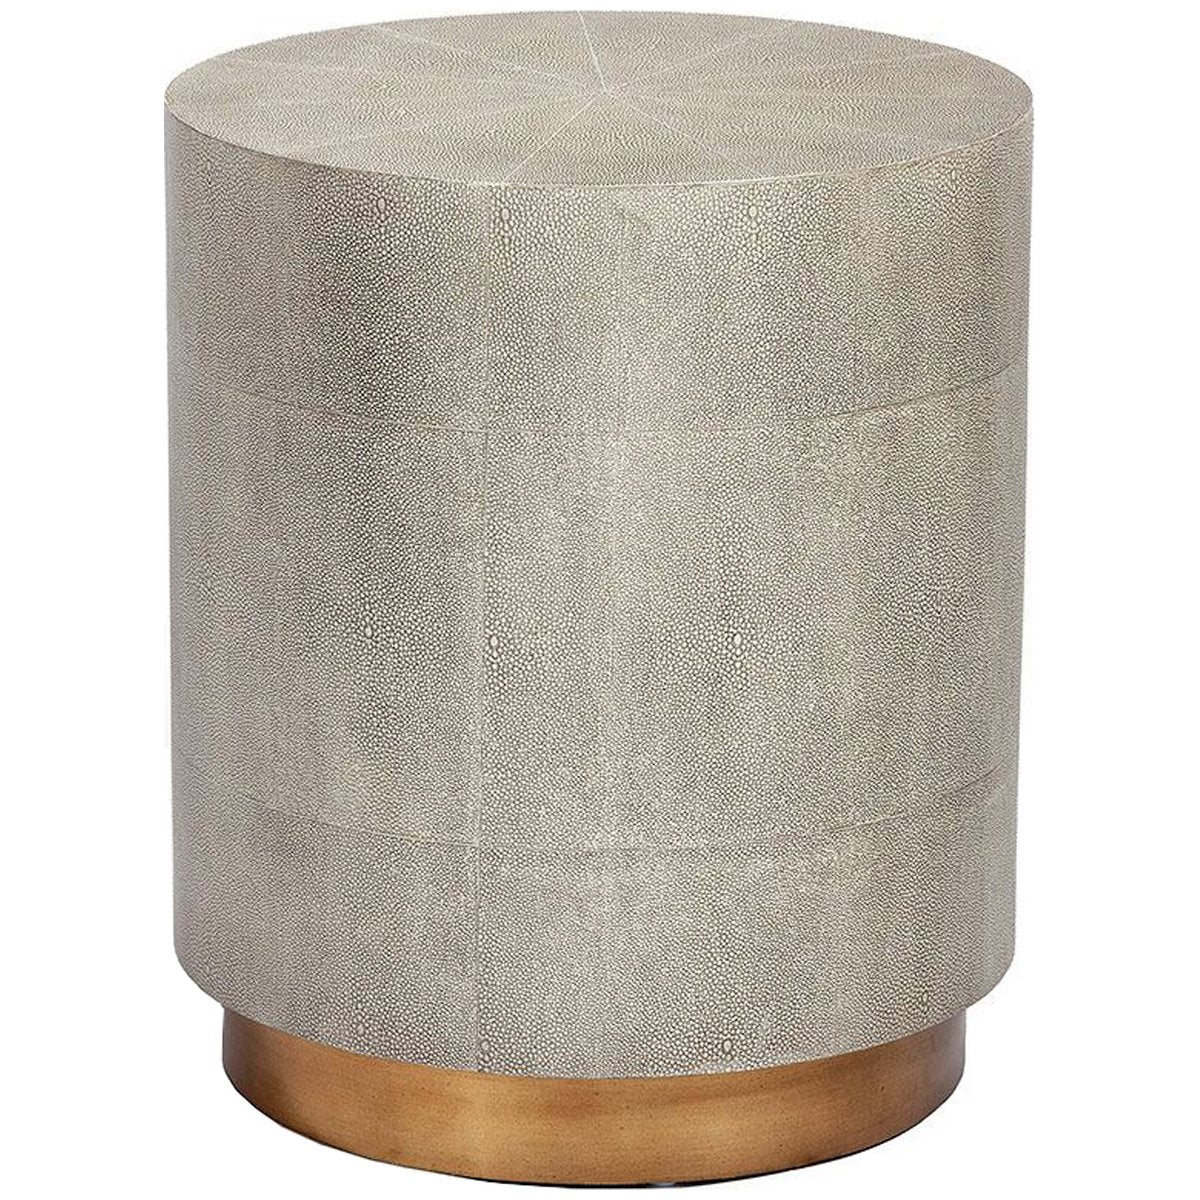 Interlude Home Kenzo Small Drum Table